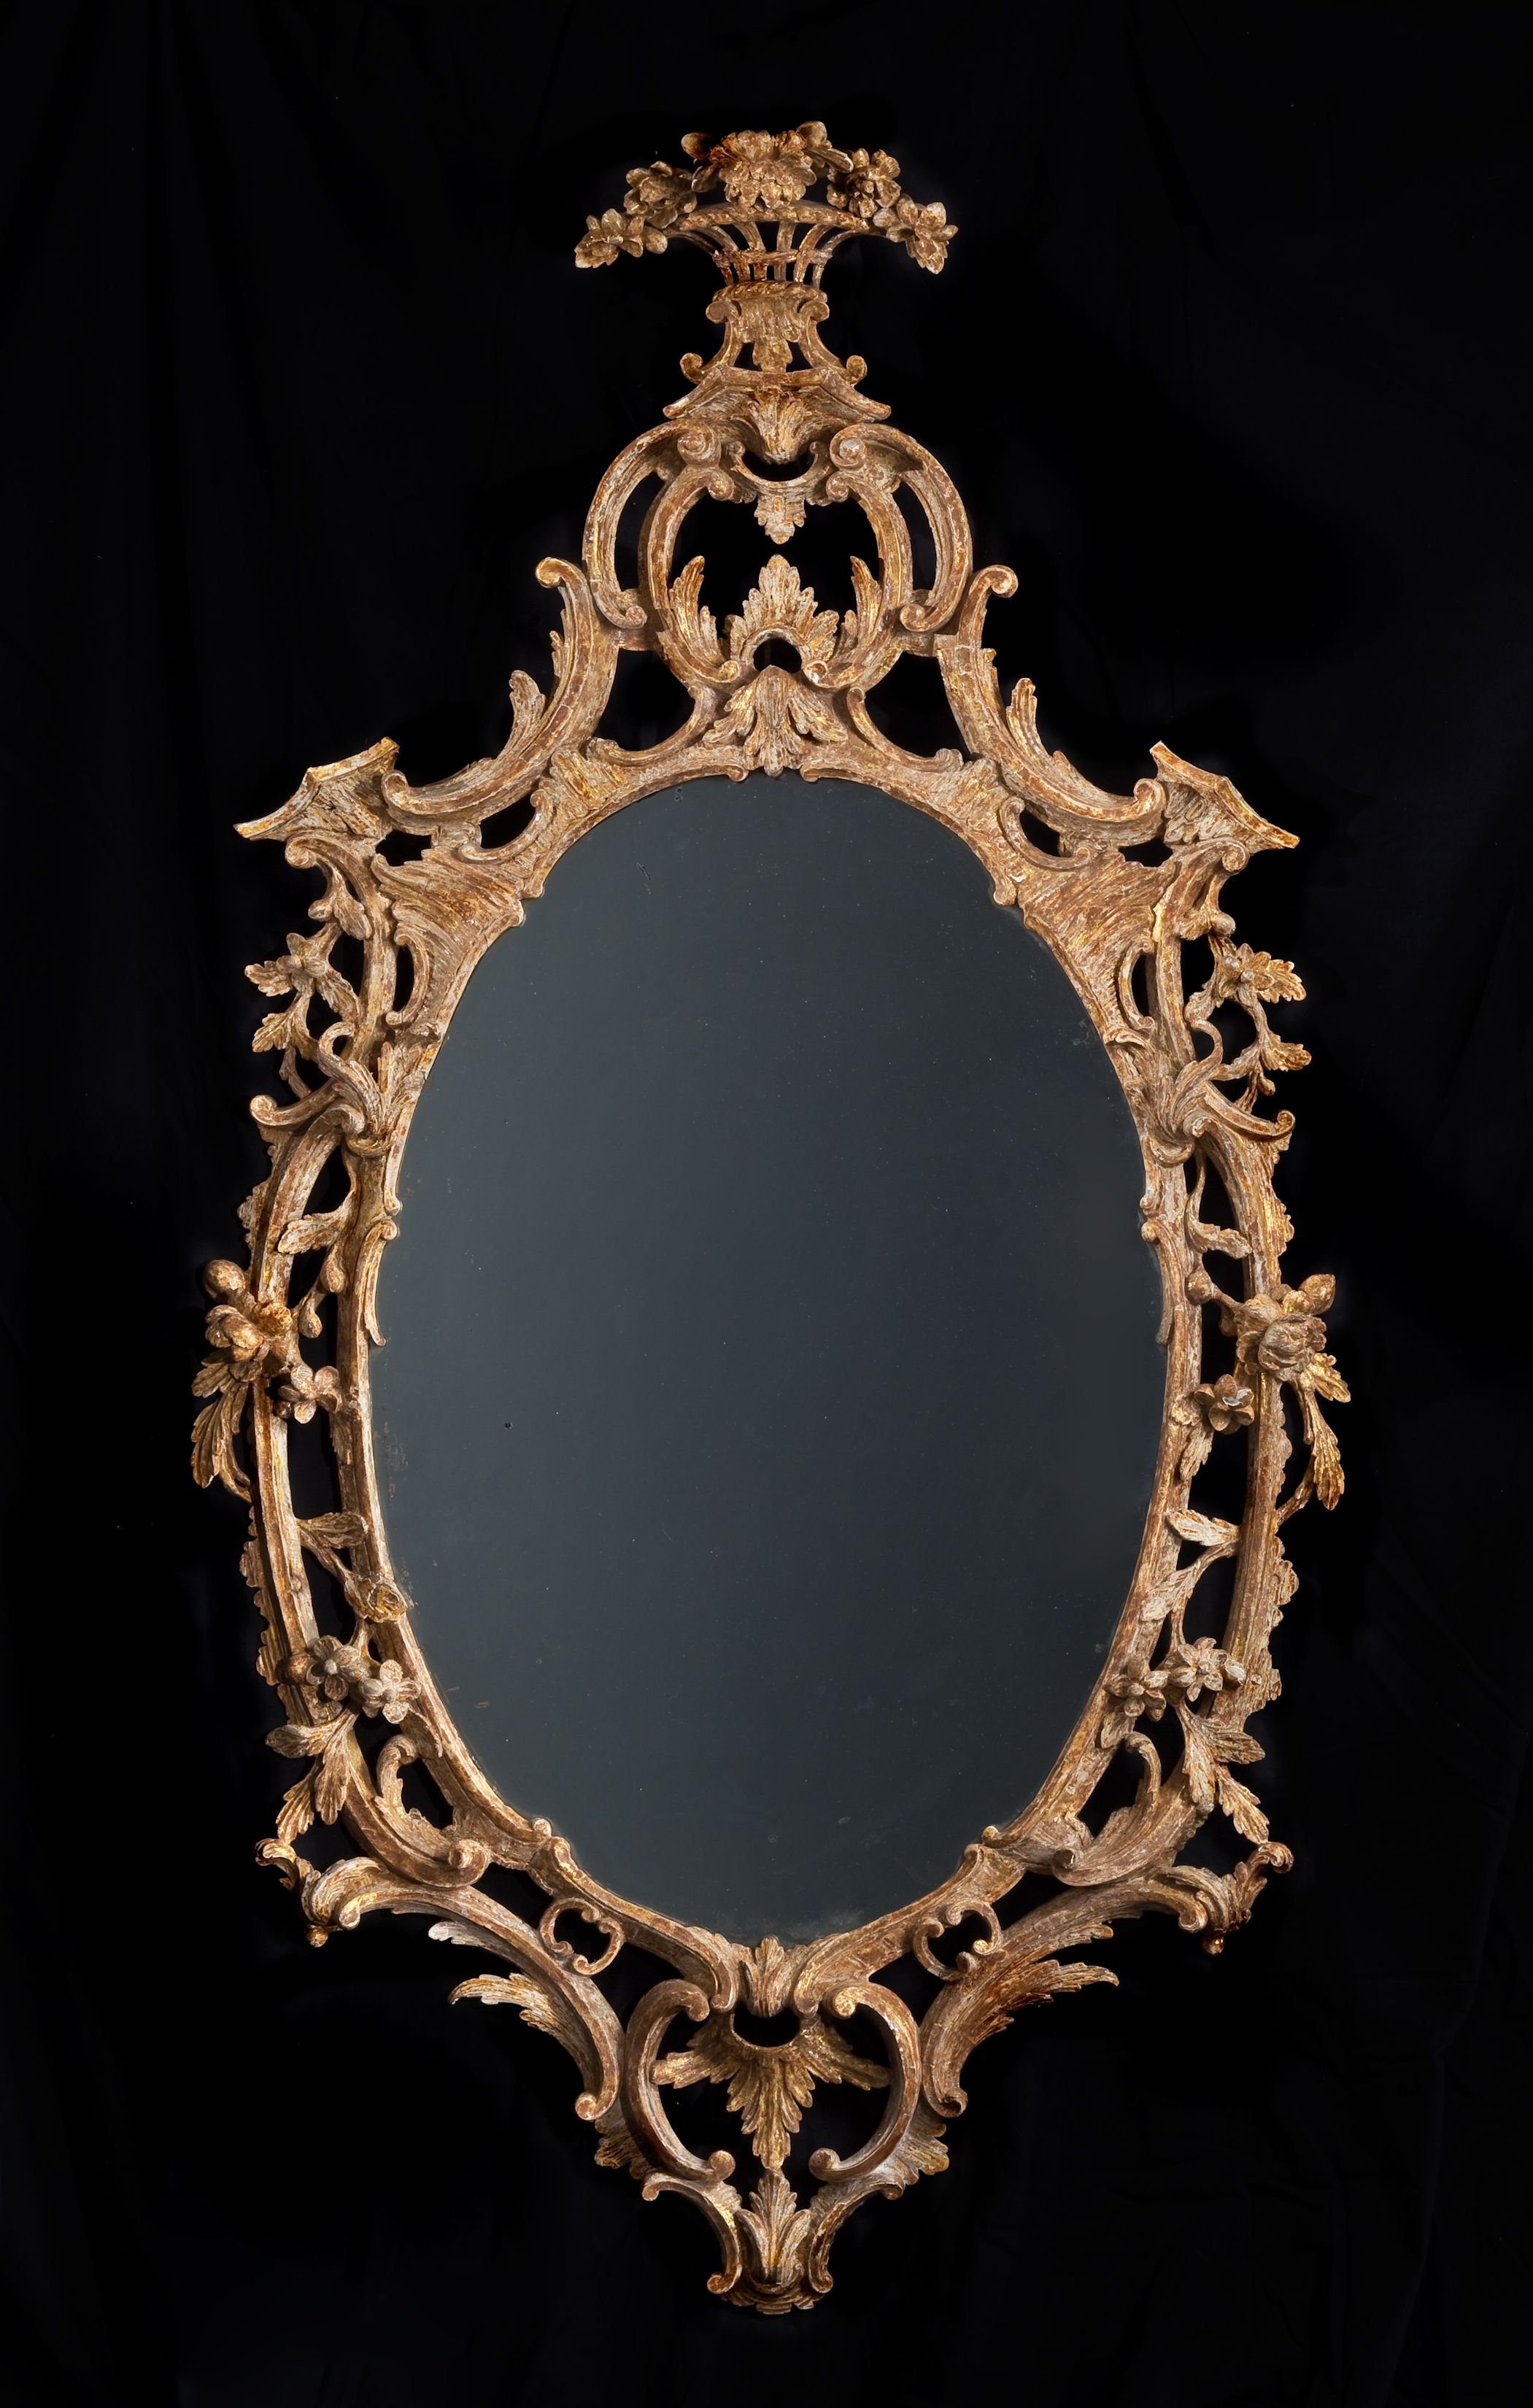 A Transitional Baroque And Rococo Mirror Clinton Howell With Regard To Rococo Mirror (View 3 of 15)